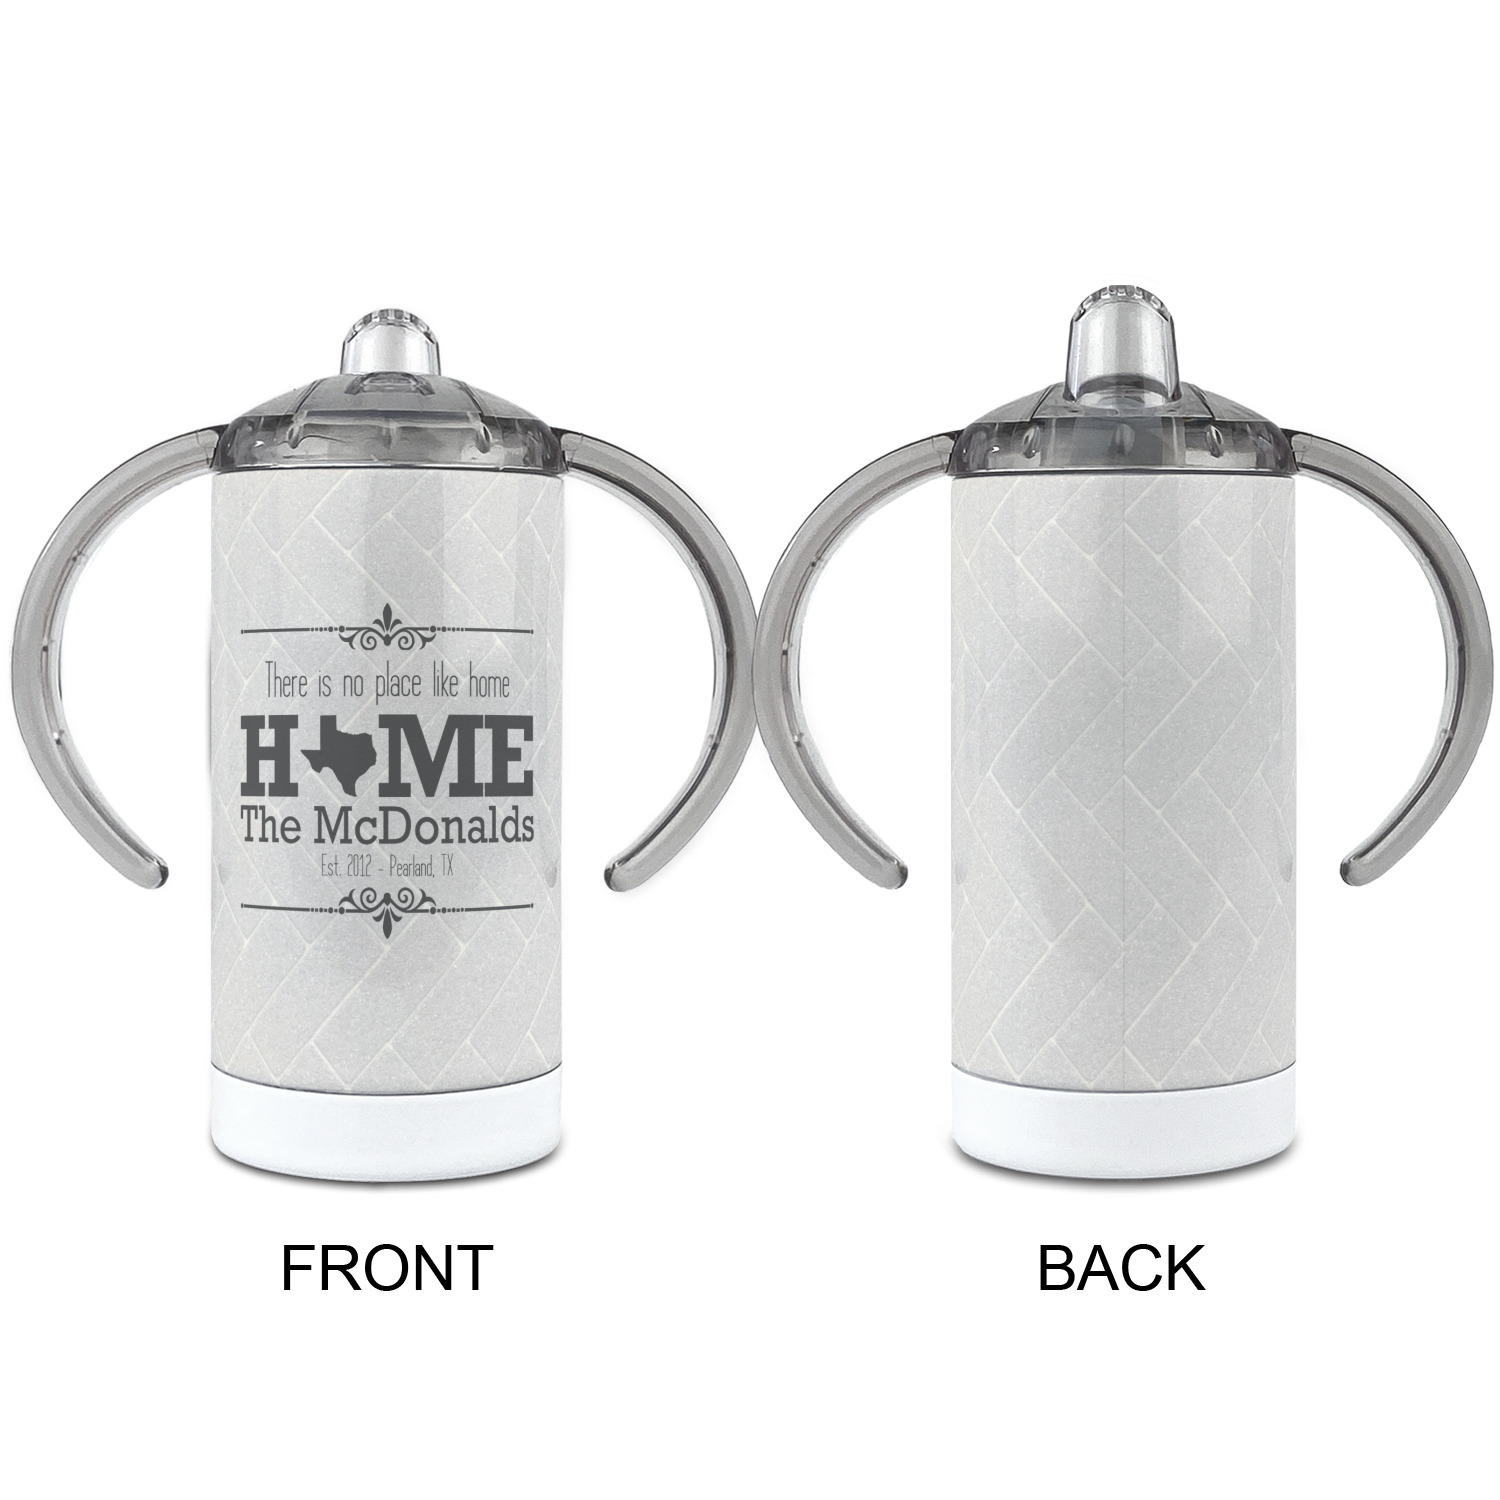 https://www.youcustomizeit.com/common/MAKE/1767911/Home-State-12-oz-Stainless-Steel-Sippy-Cups-APPROVAL.jpg?lm=1671164723